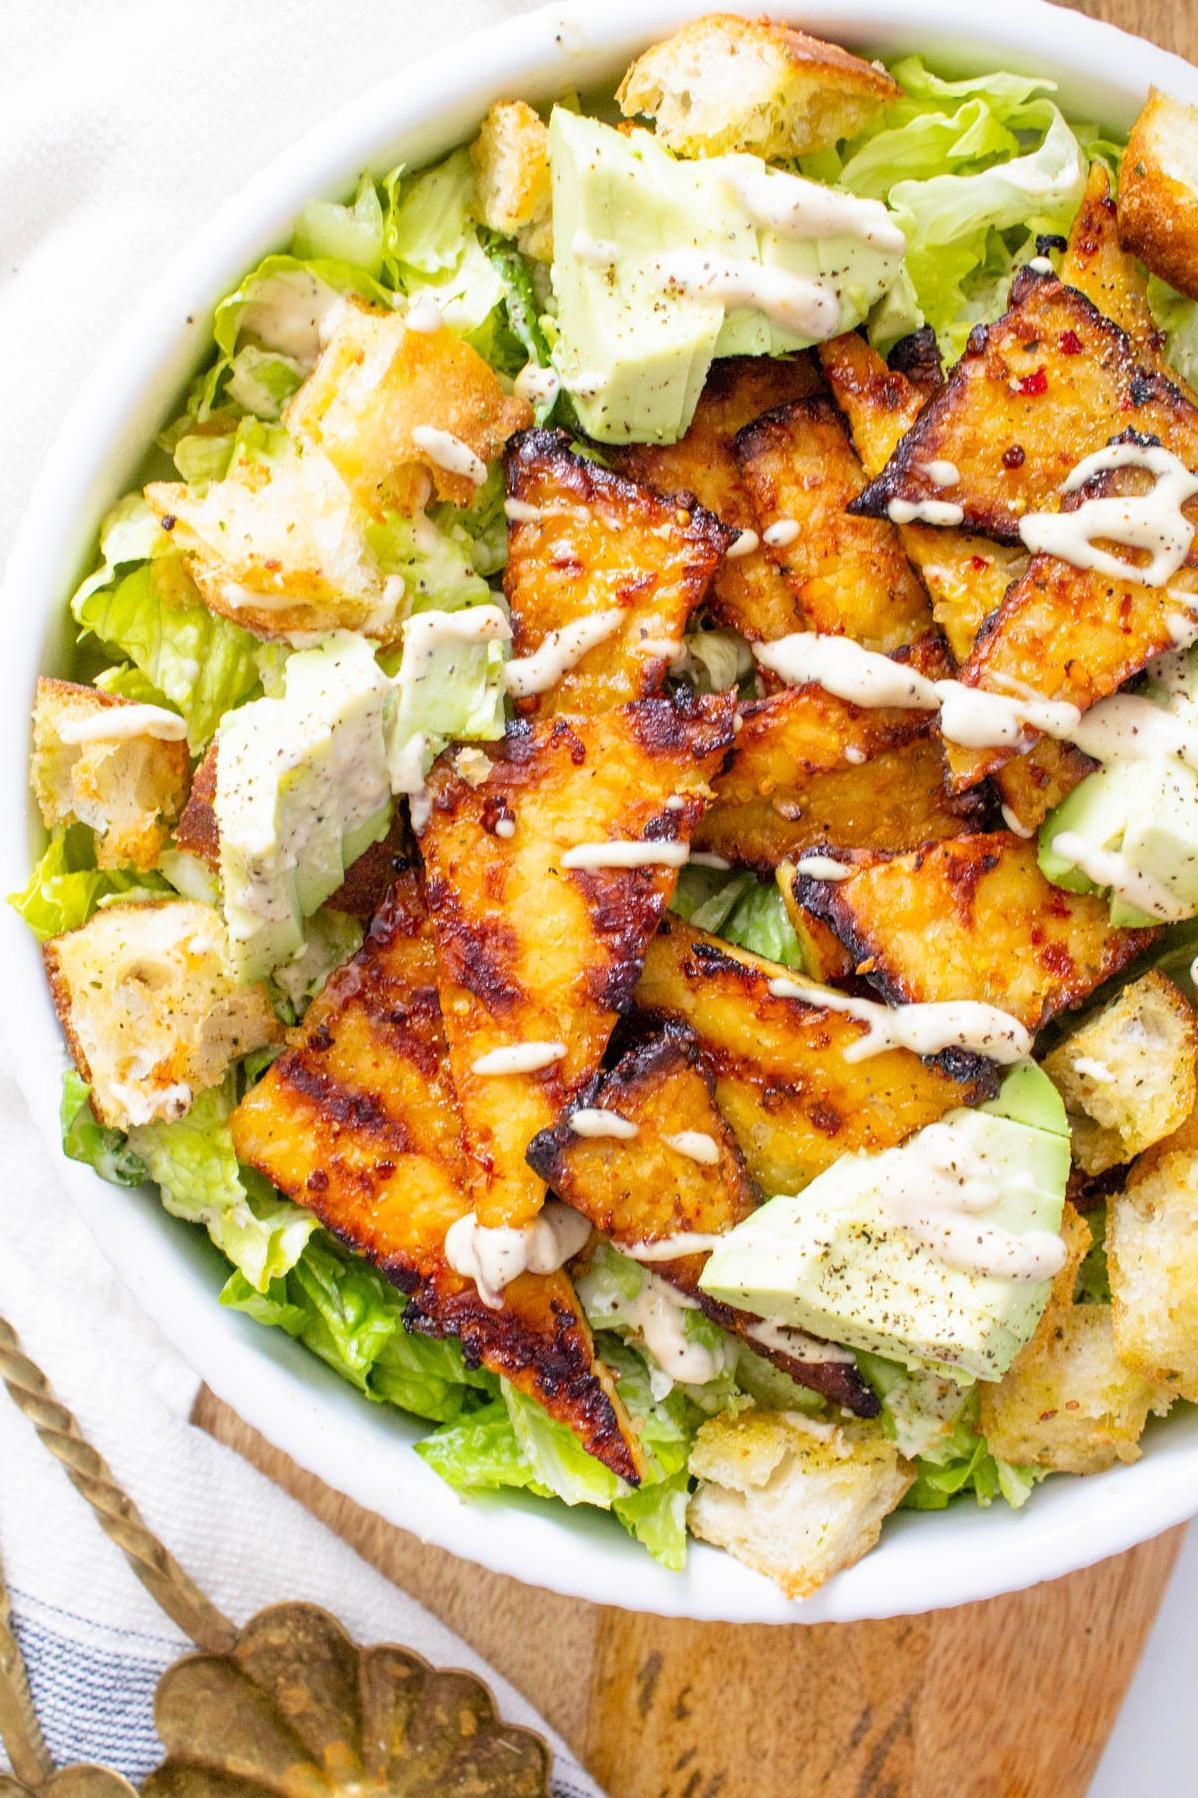  Who says salads are boring? Not this vibrant tempeh creation!